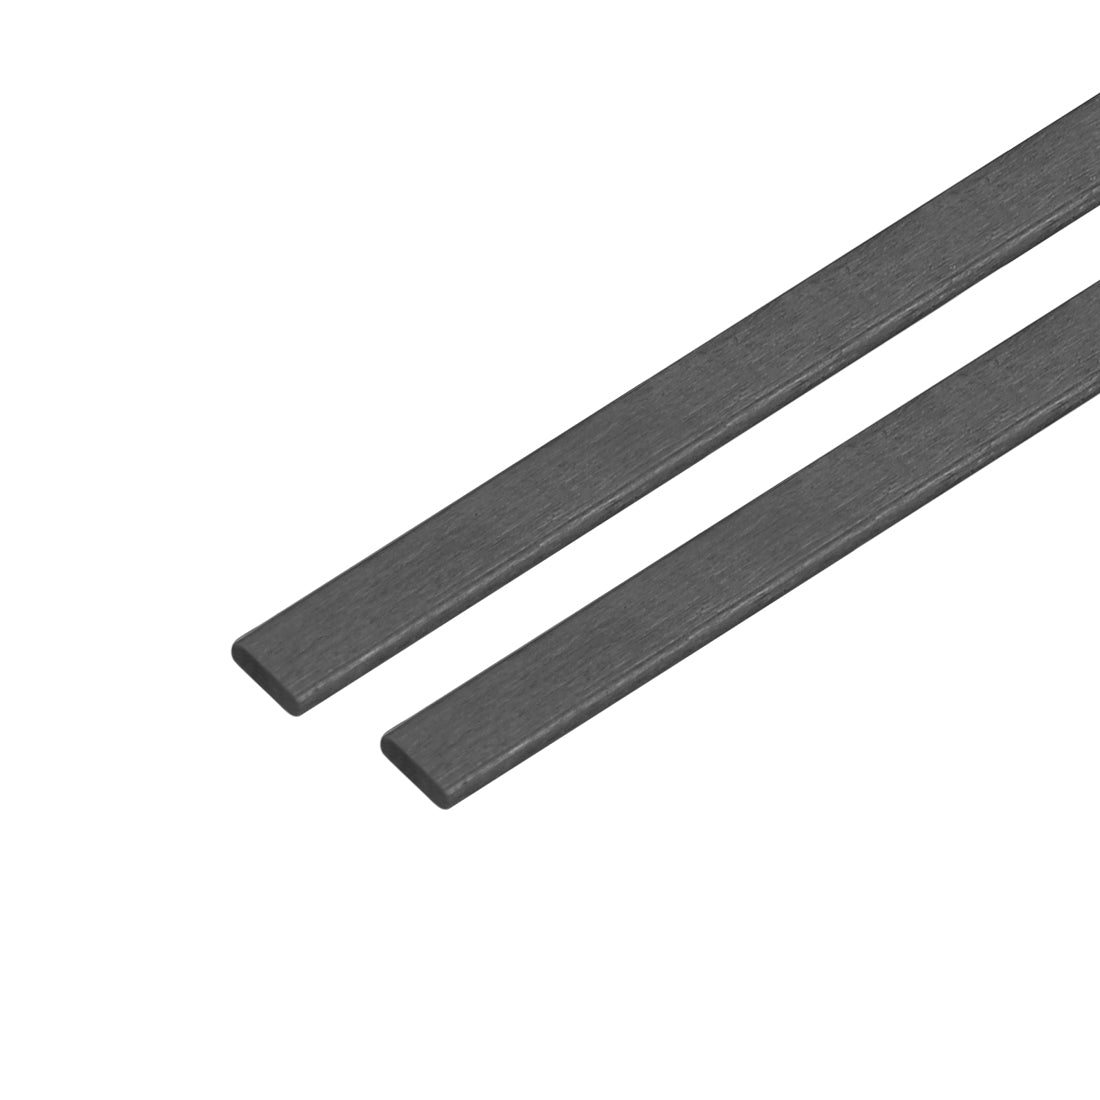 uxcell Uxcell Carbon Fiber Strip Bars 1x3mm 200mm Length Pultruded Carbon Fiber Strips for Kites, RC Airplane 2 Pcs